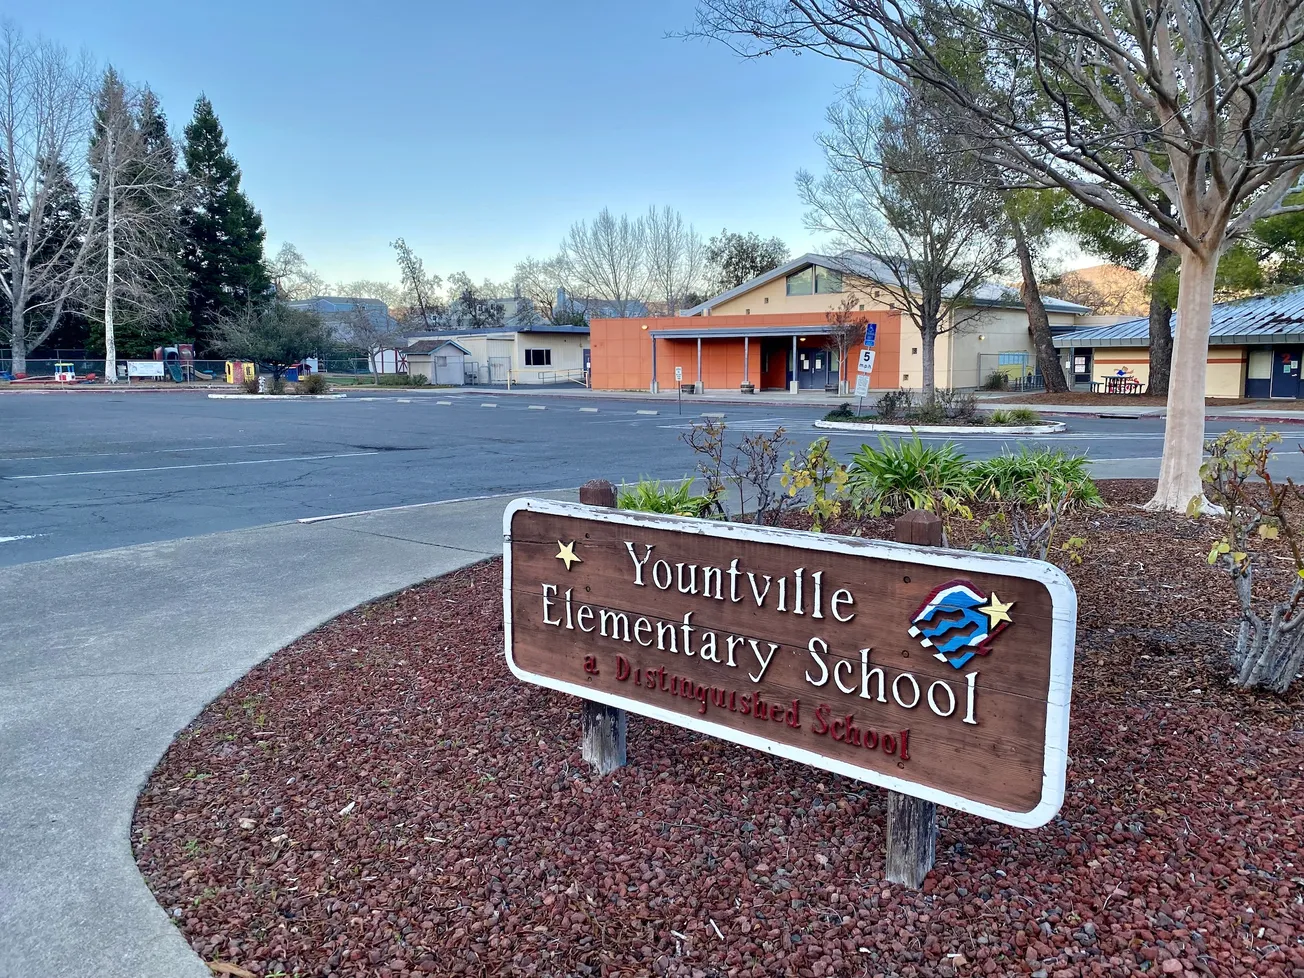 Yountville residents can weigh in on uses for school property